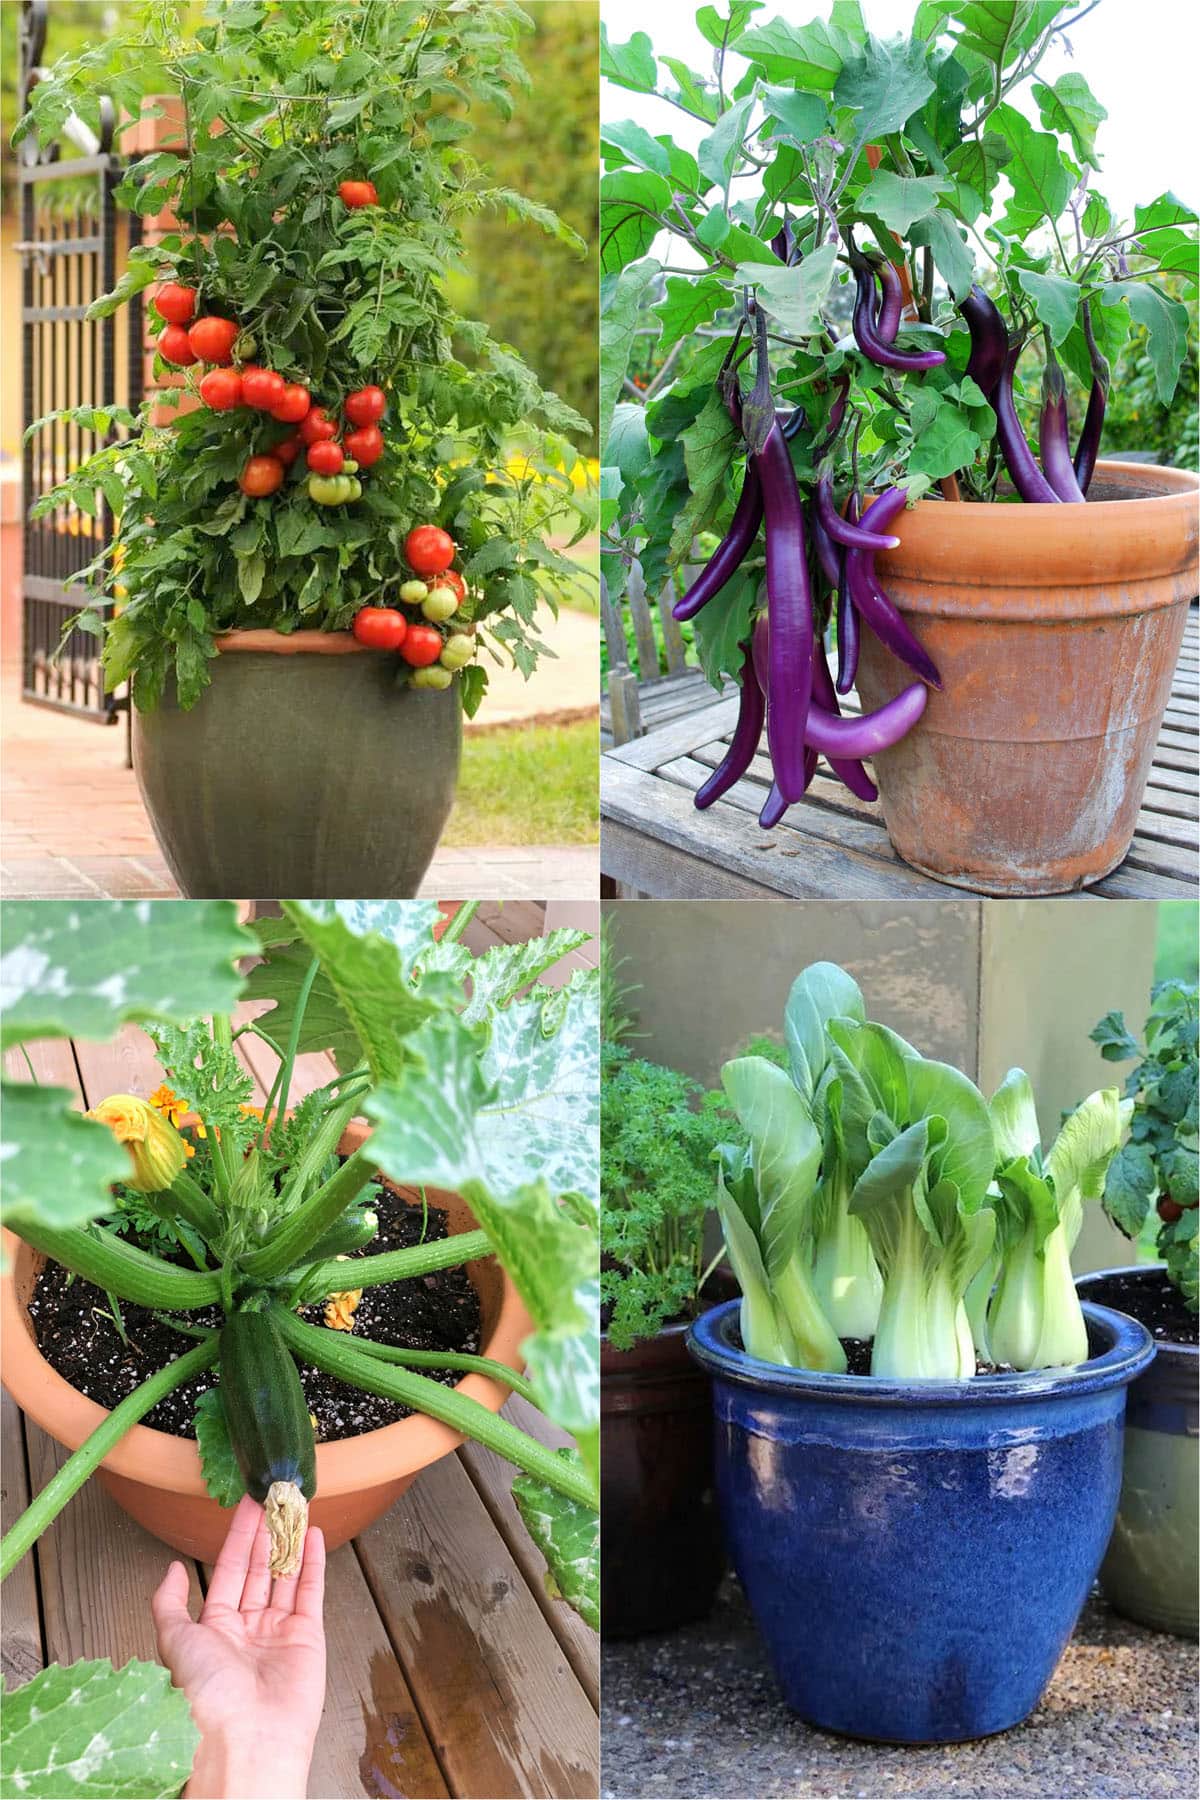 SELECTING THE BEST VEGETABLES FOR YOUR CONTAINER GARDEN - Plant